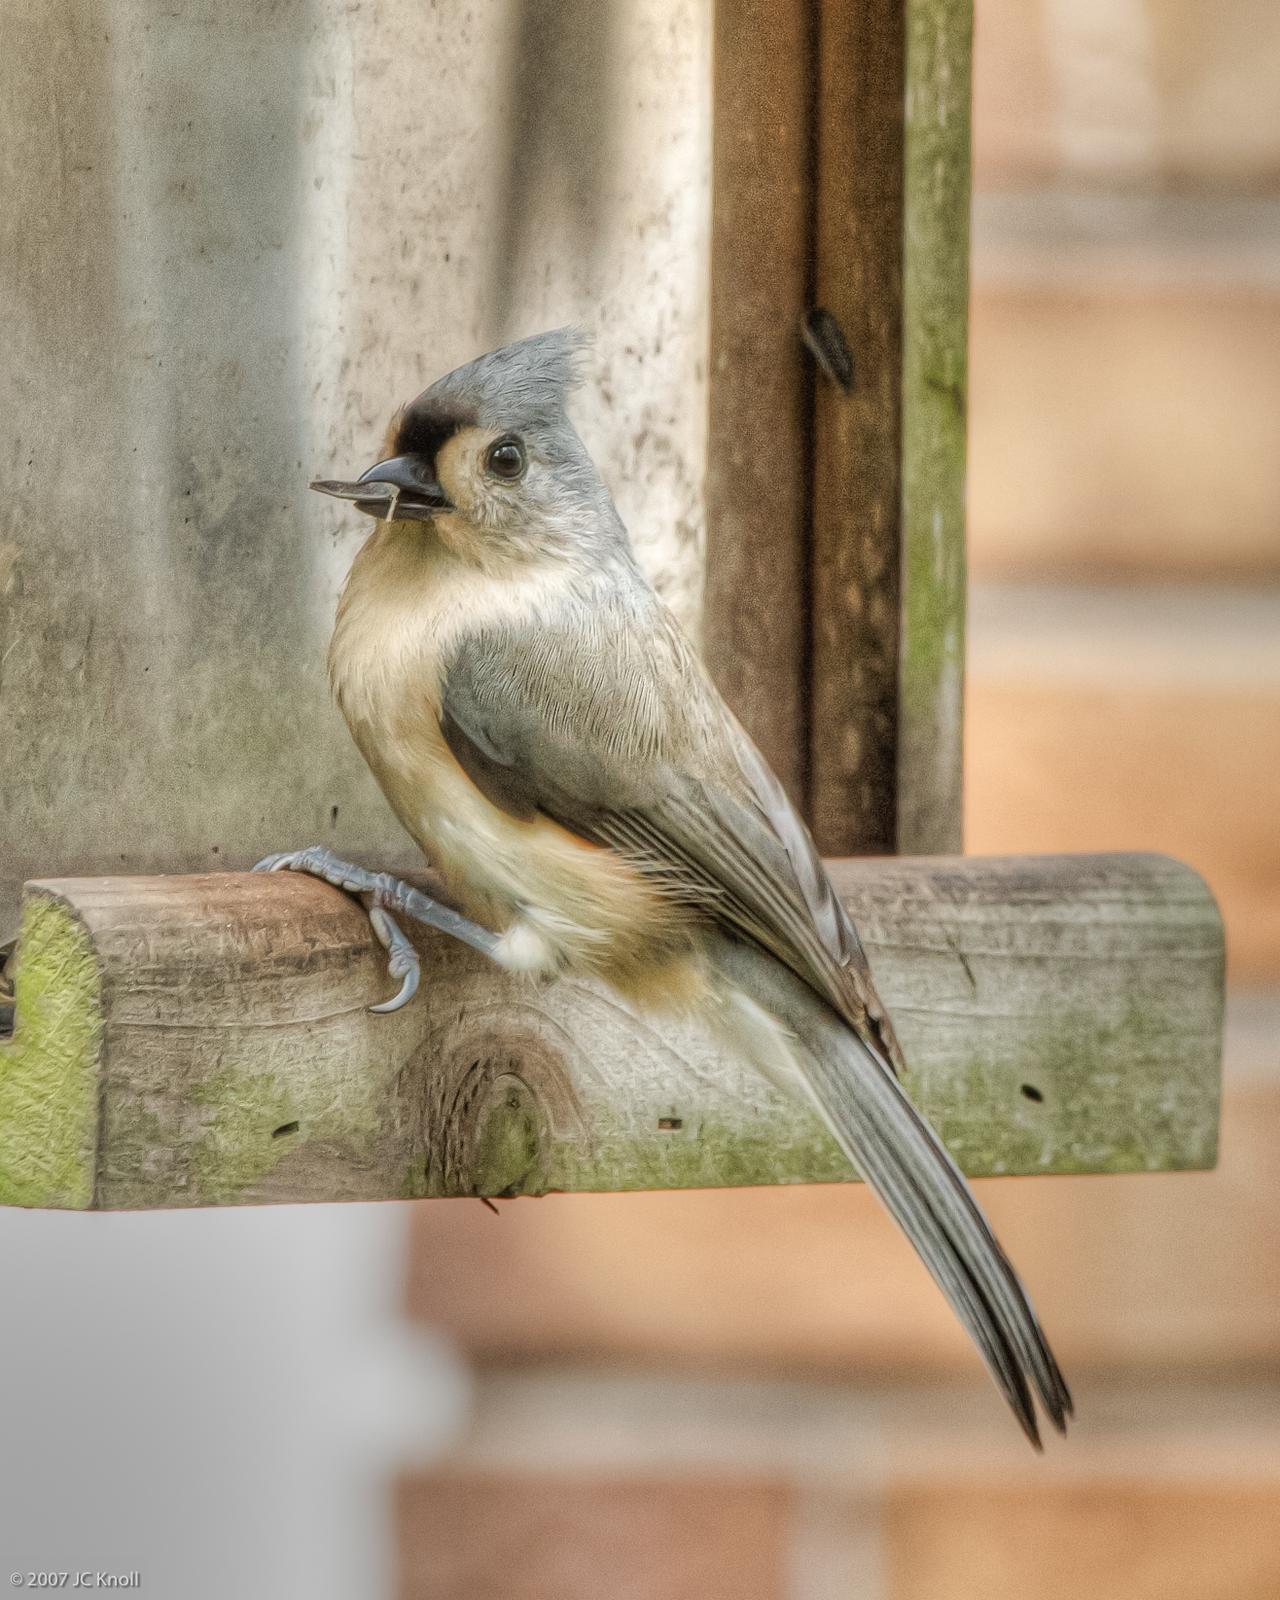 Tufted Titmouse Photo by JC Knoll